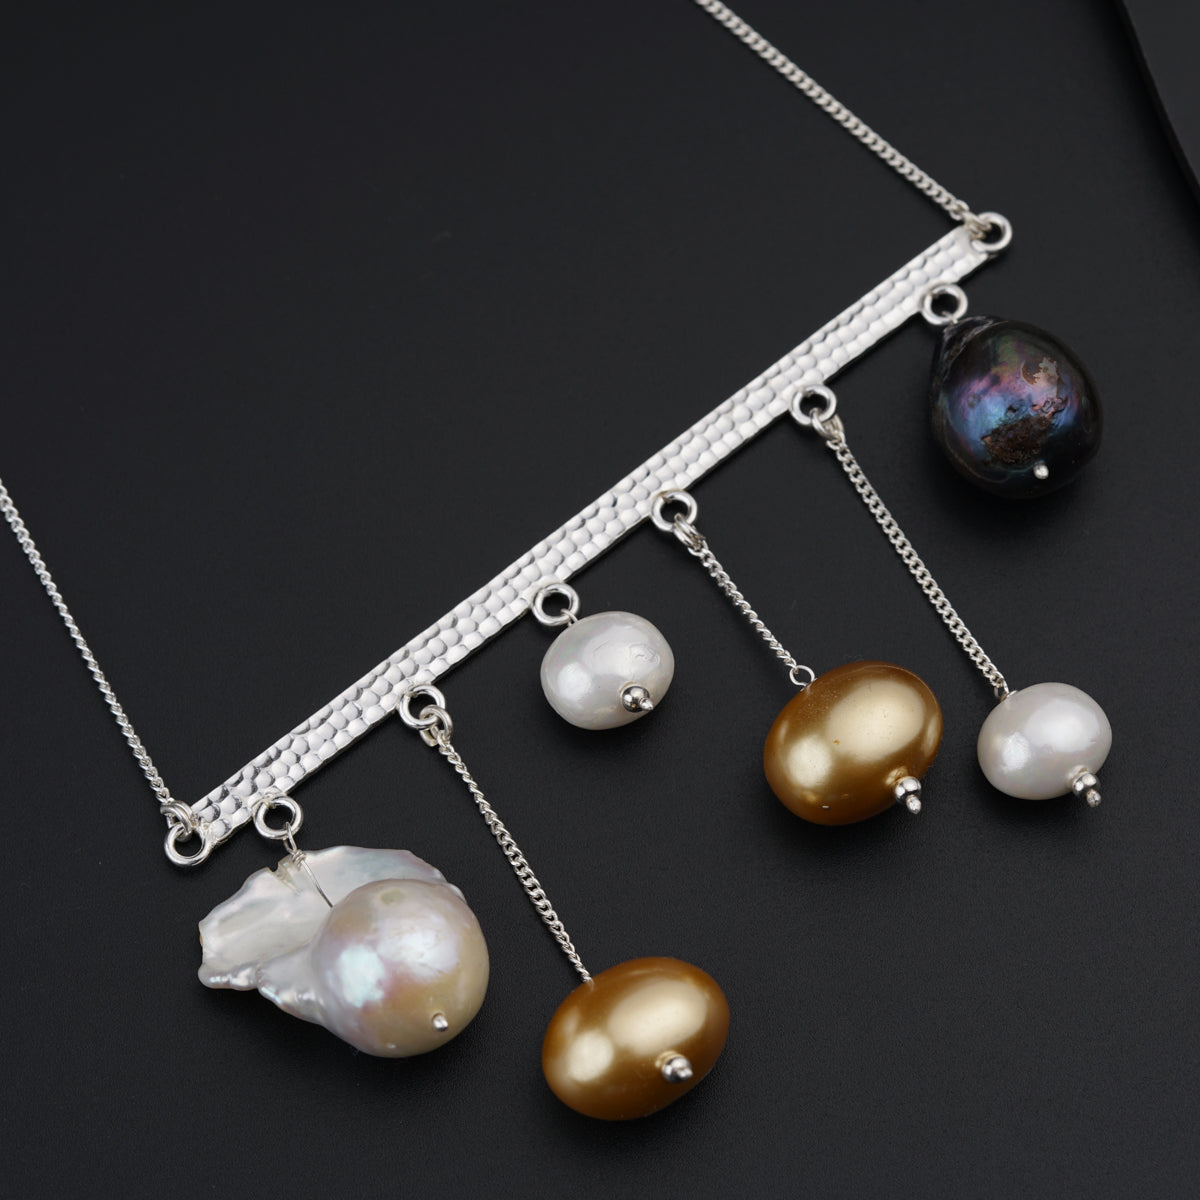 Abstract silver necklace : Pearls